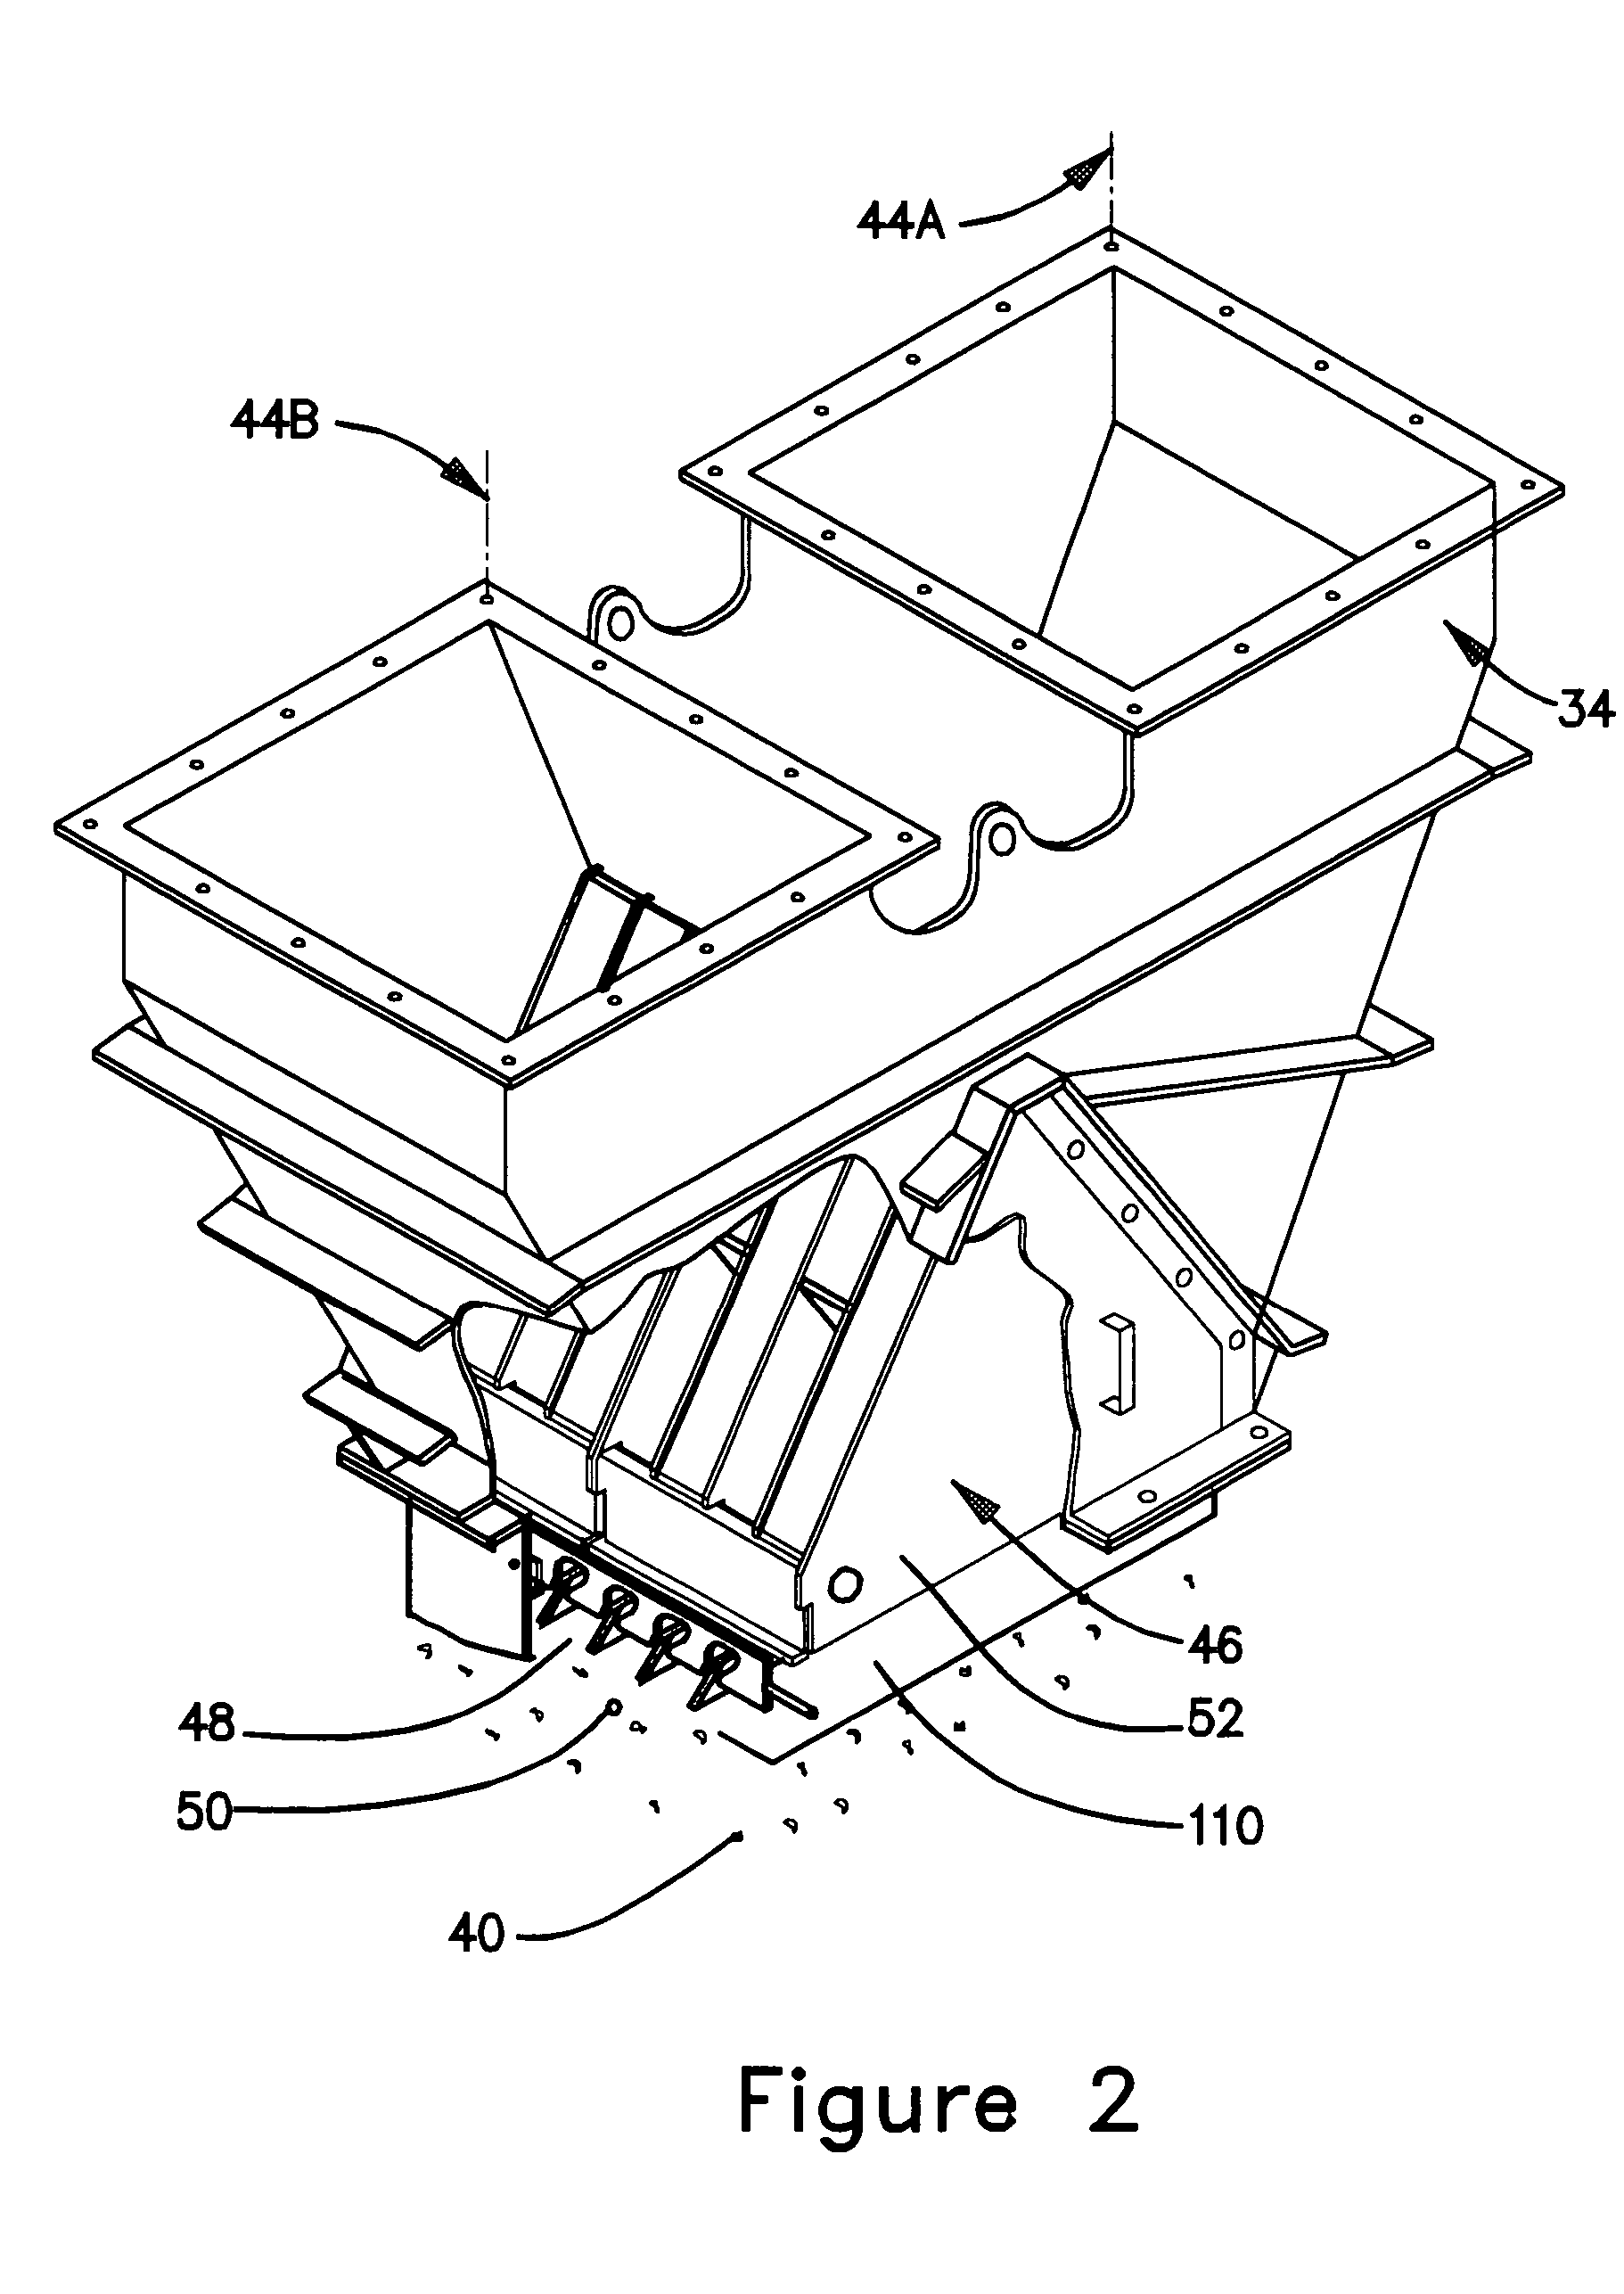 Riffle distributor assembly for a fossil fuel fired combustion arrangement